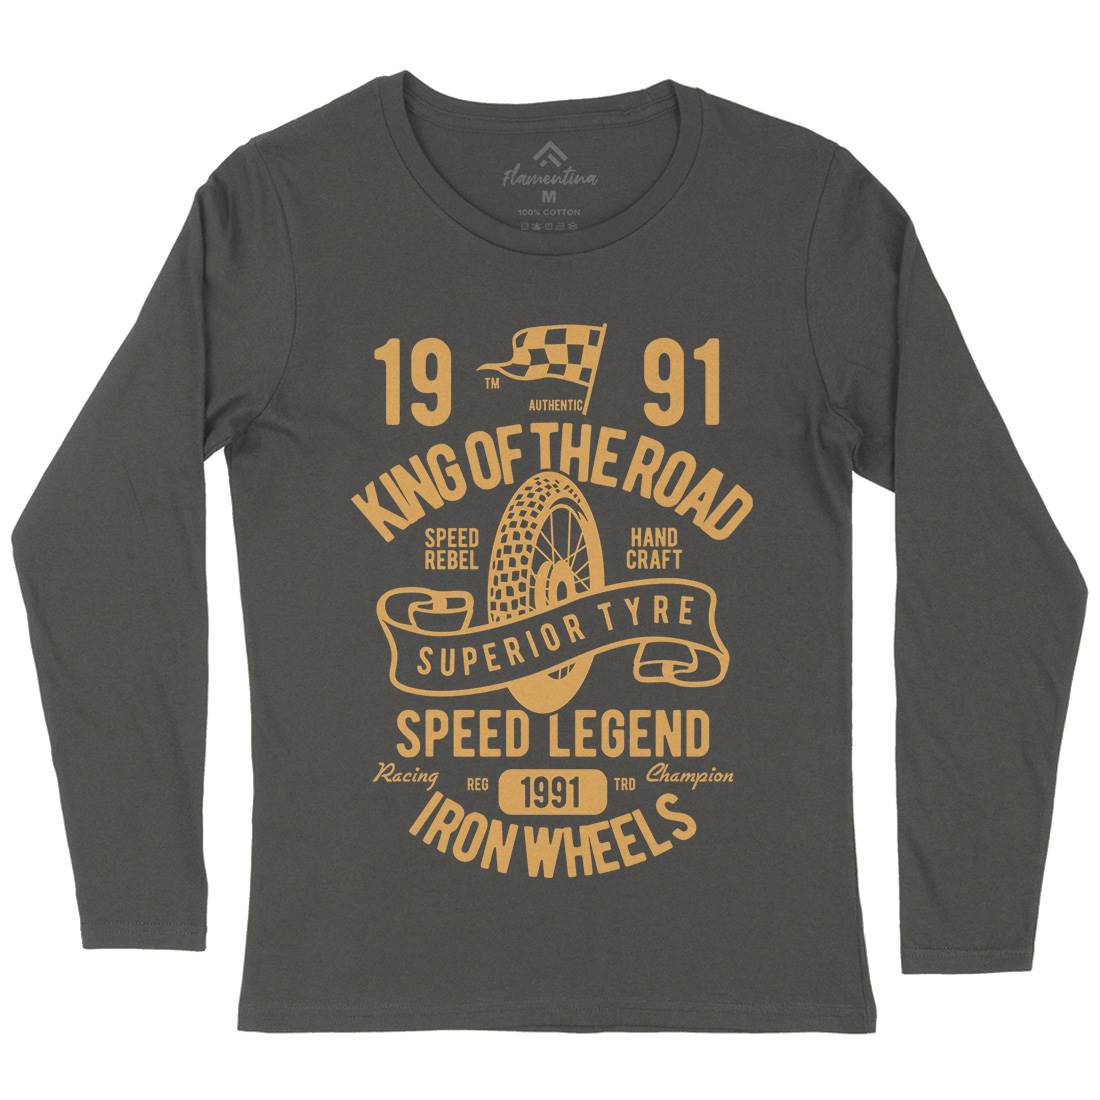 Superior Tyre King Of The Road Womens Long Sleeve T-Shirt Motorcycles B458